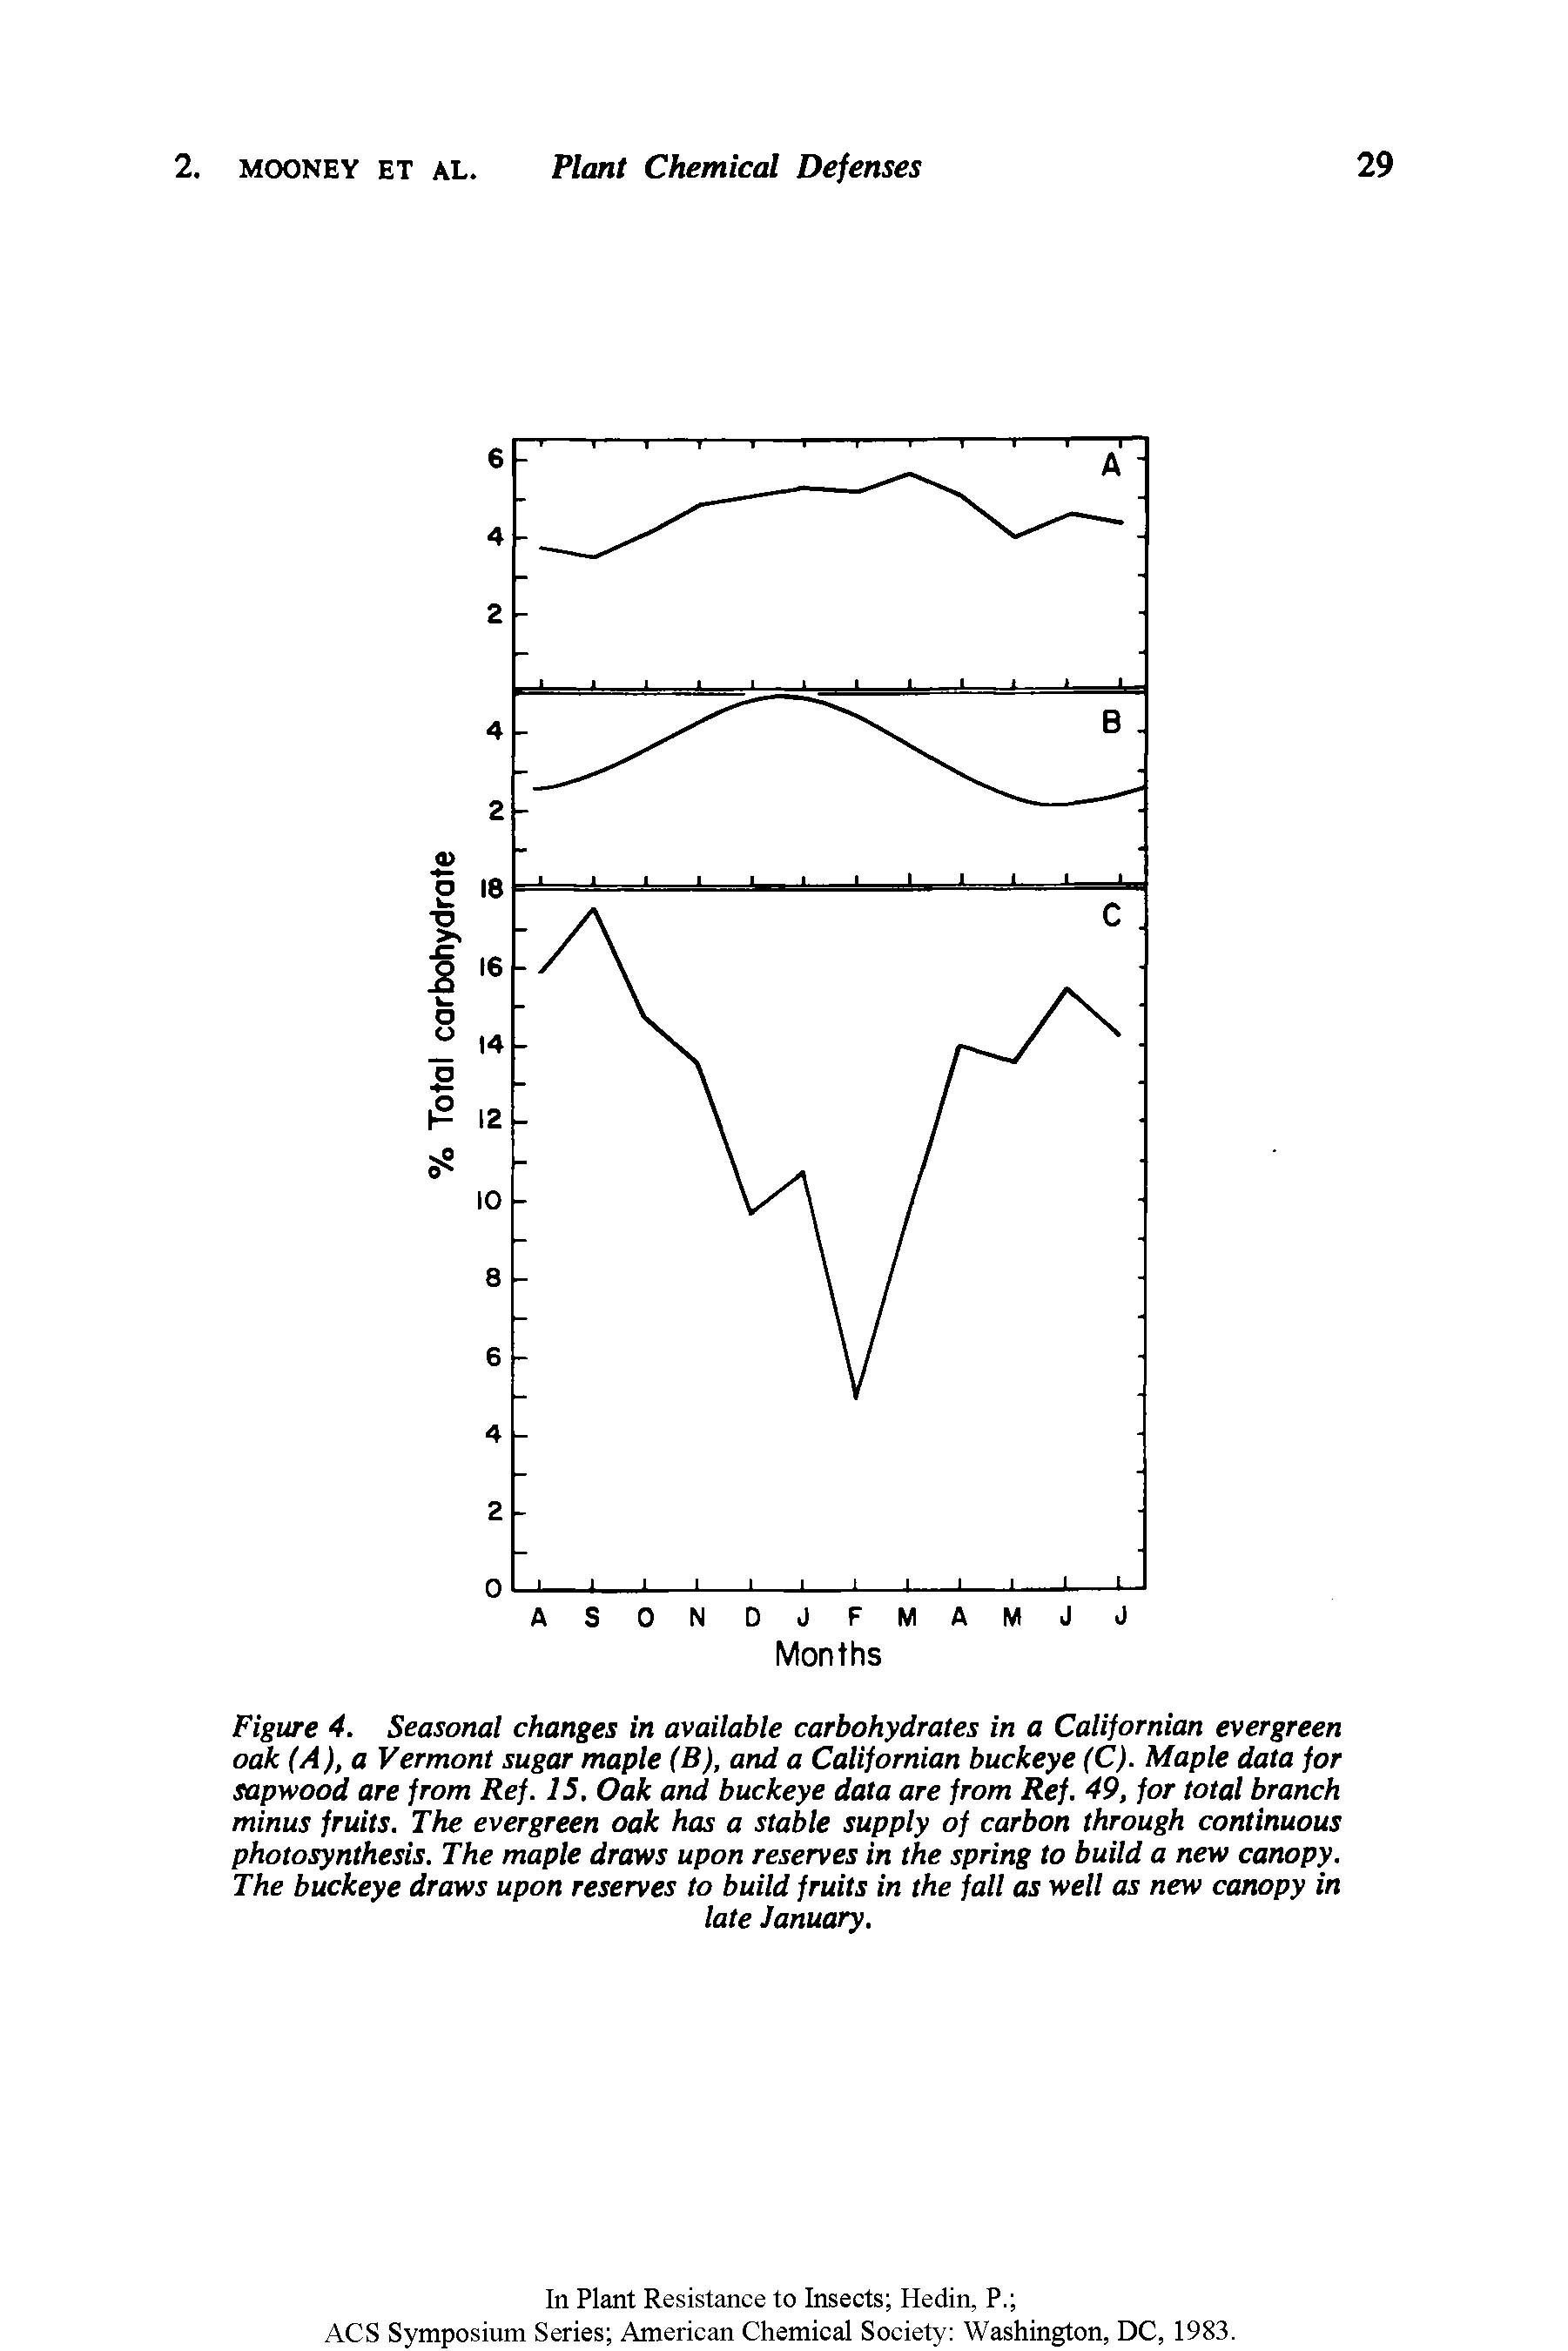 Figure 4. Seasonal changes in available carbohydrates in a Californian evergreen oak (A), a Vermont sugar maple (B), arul a Californian buckeye (C). Maple data for sapwood are from Ref. 15, Oak and buckeye data are from Ref. 49, for total branch minus fruits. The evergreen oak has a stable supply of carbon through continuous photosynthesis. The maple draws upon reserves in the spring to build a new canopy. The buckeye draws upon reserves to build fruits in the fall as well as new canopy in...